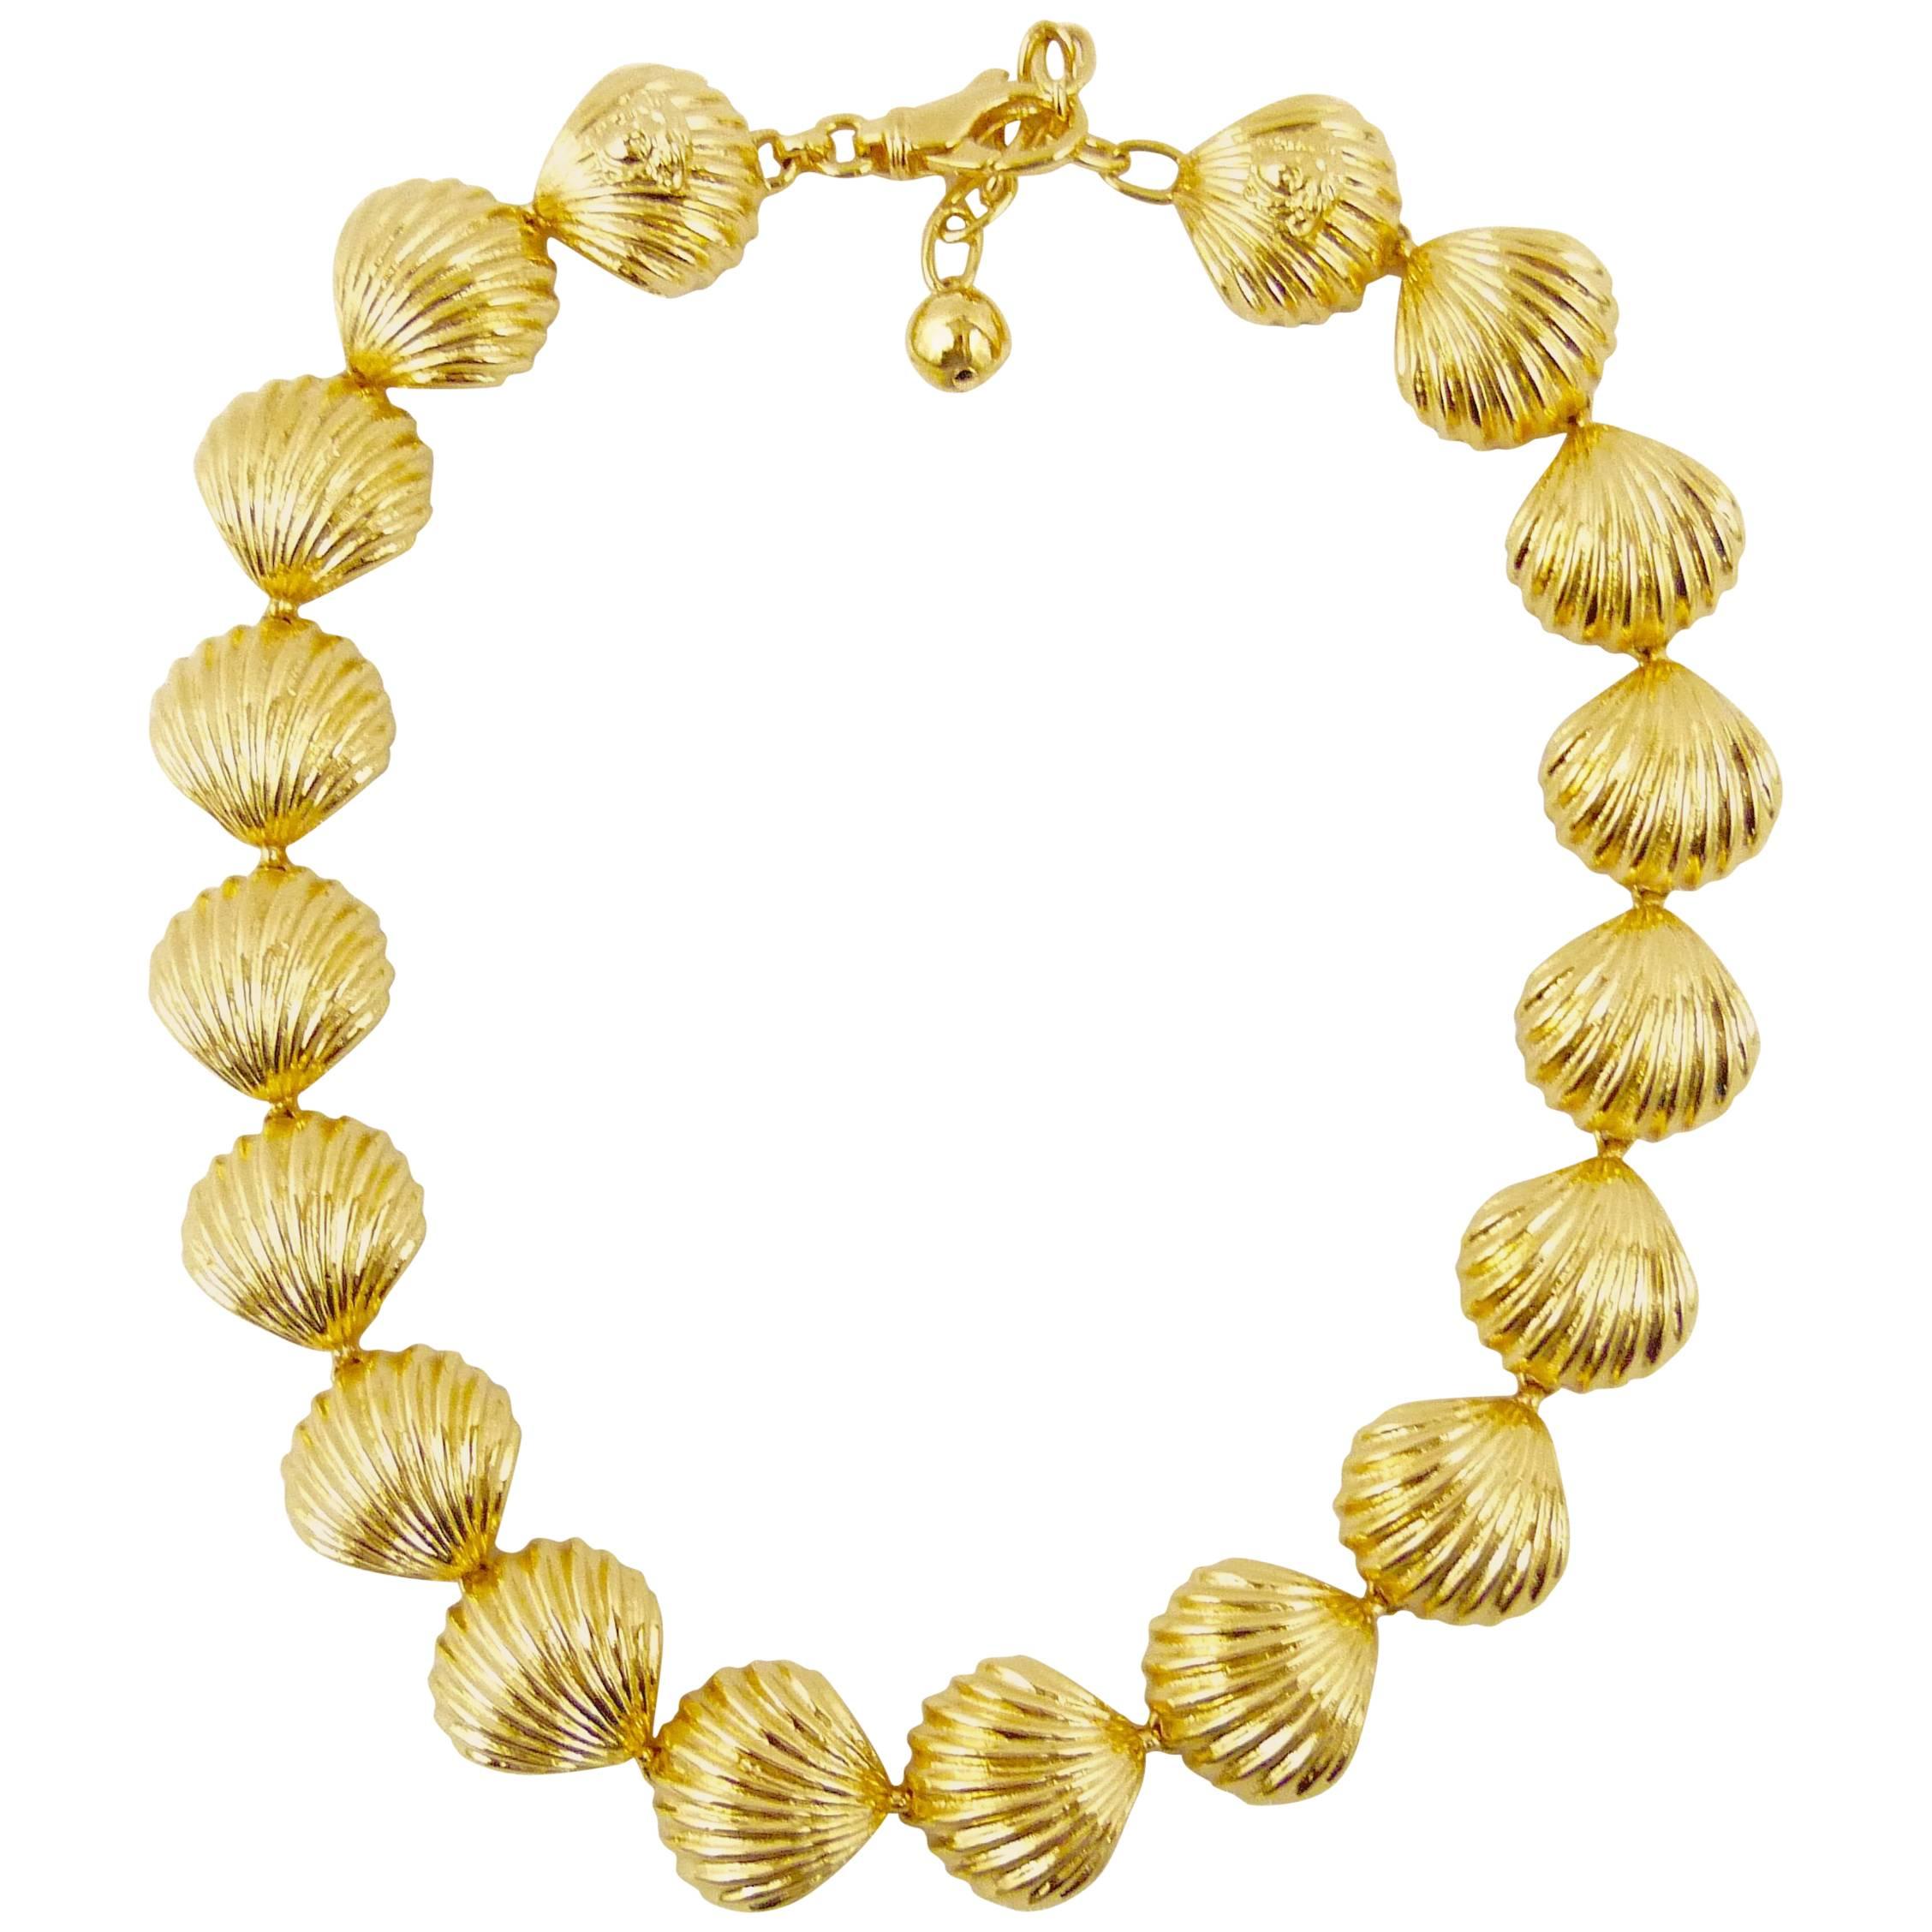 Gianni Versace 1990's gold tone shell necklace For Sale